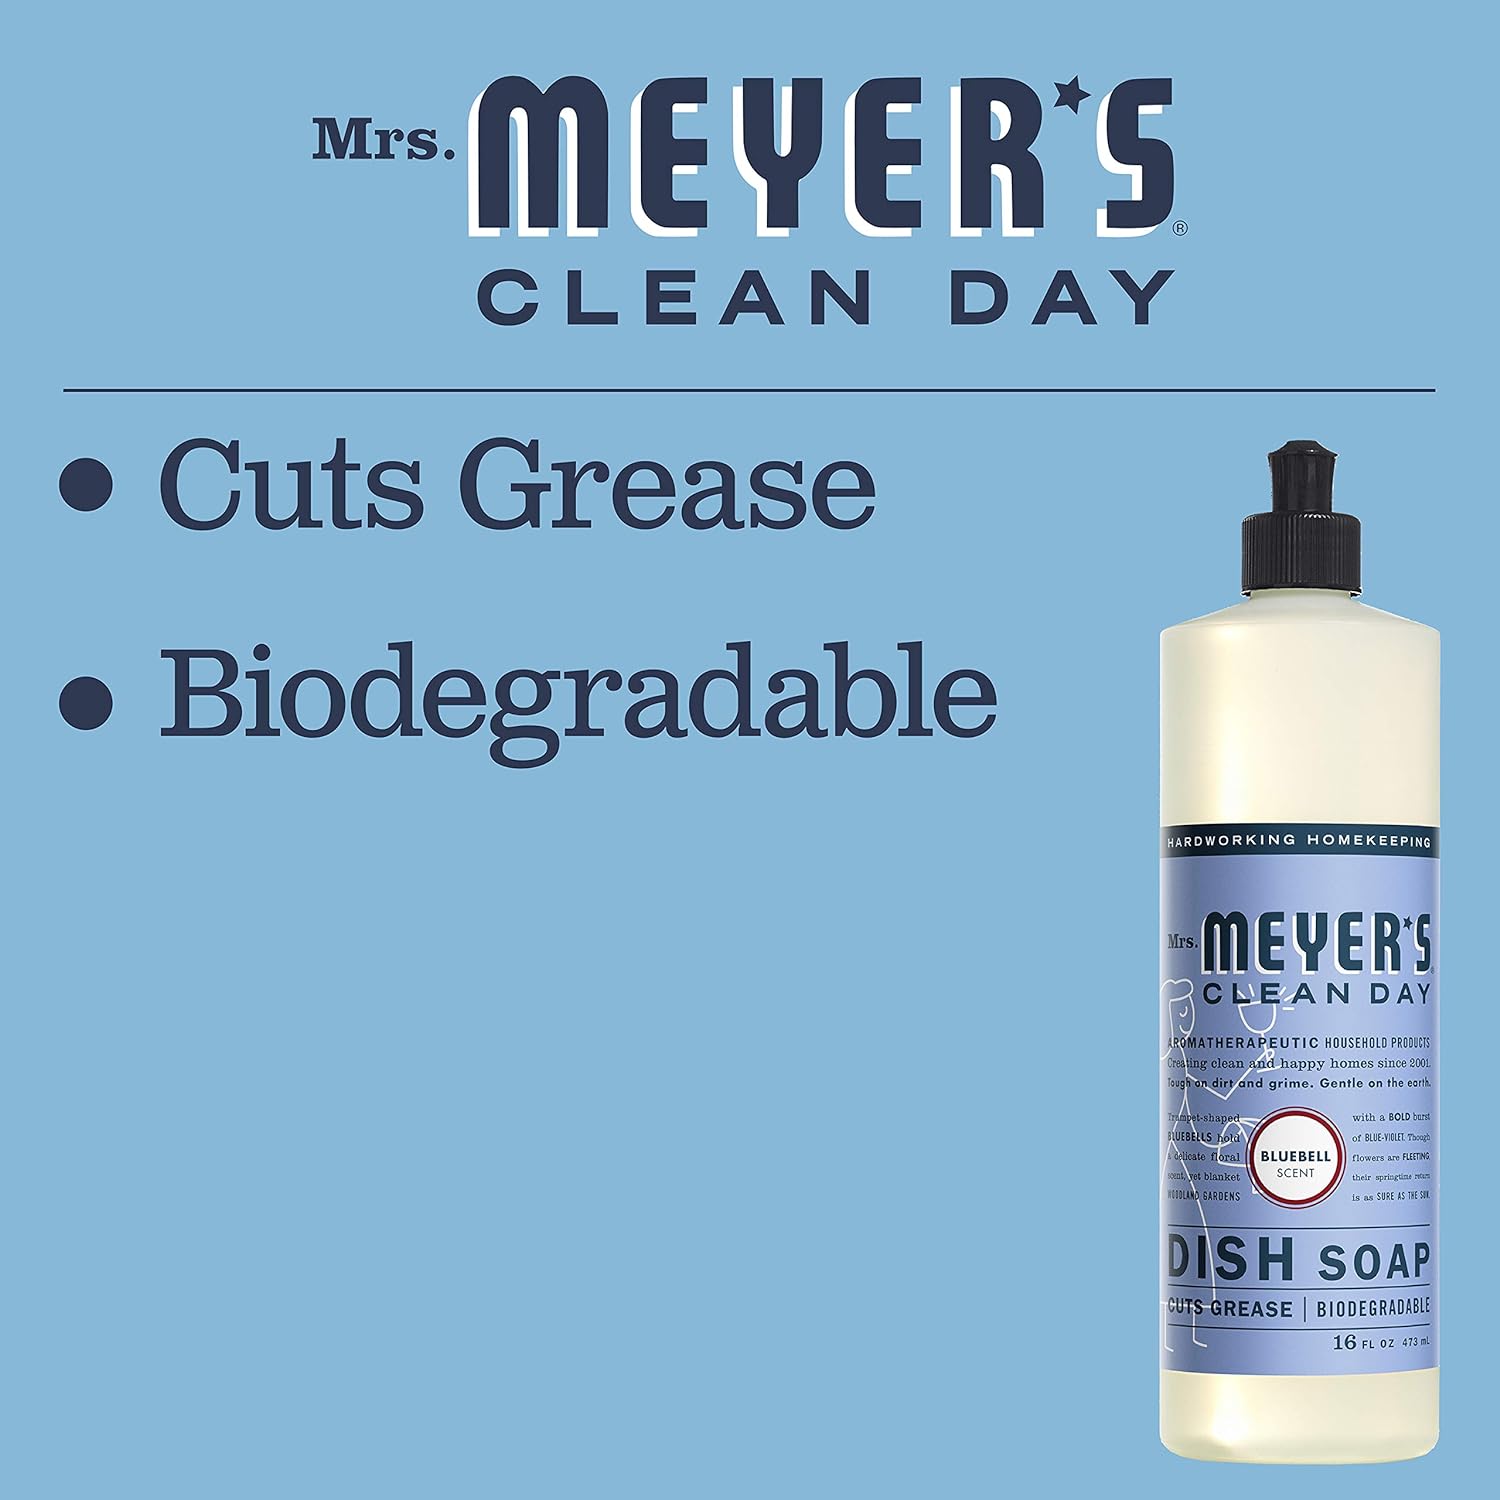 MRS. MEYER'S CLEAN DAY Liquid Dish Soap, Biodegradable Formula, Bluebell, 16 fl. oz - Pack of 3 : Health & Household